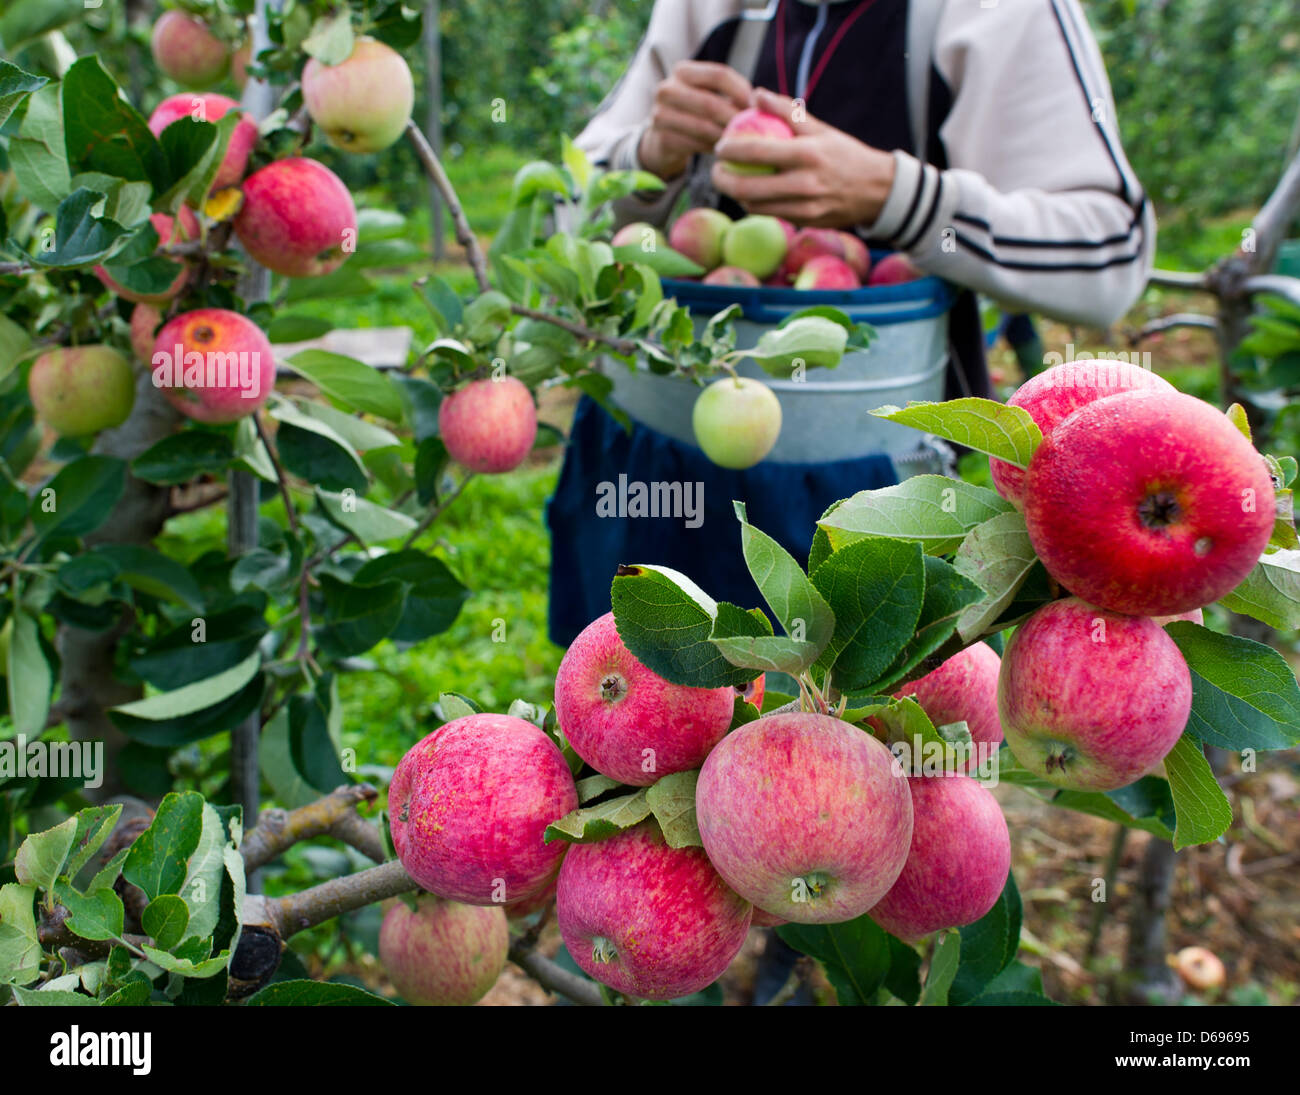 A Polish harvester of the fruit farm Herzberg picks apples of the kind Piros in Frankfurt (Oder), Germany, 31 July 2012. Many fruit farms have started harvesting early apples. Photo: Patrick Pleul Stock Photo